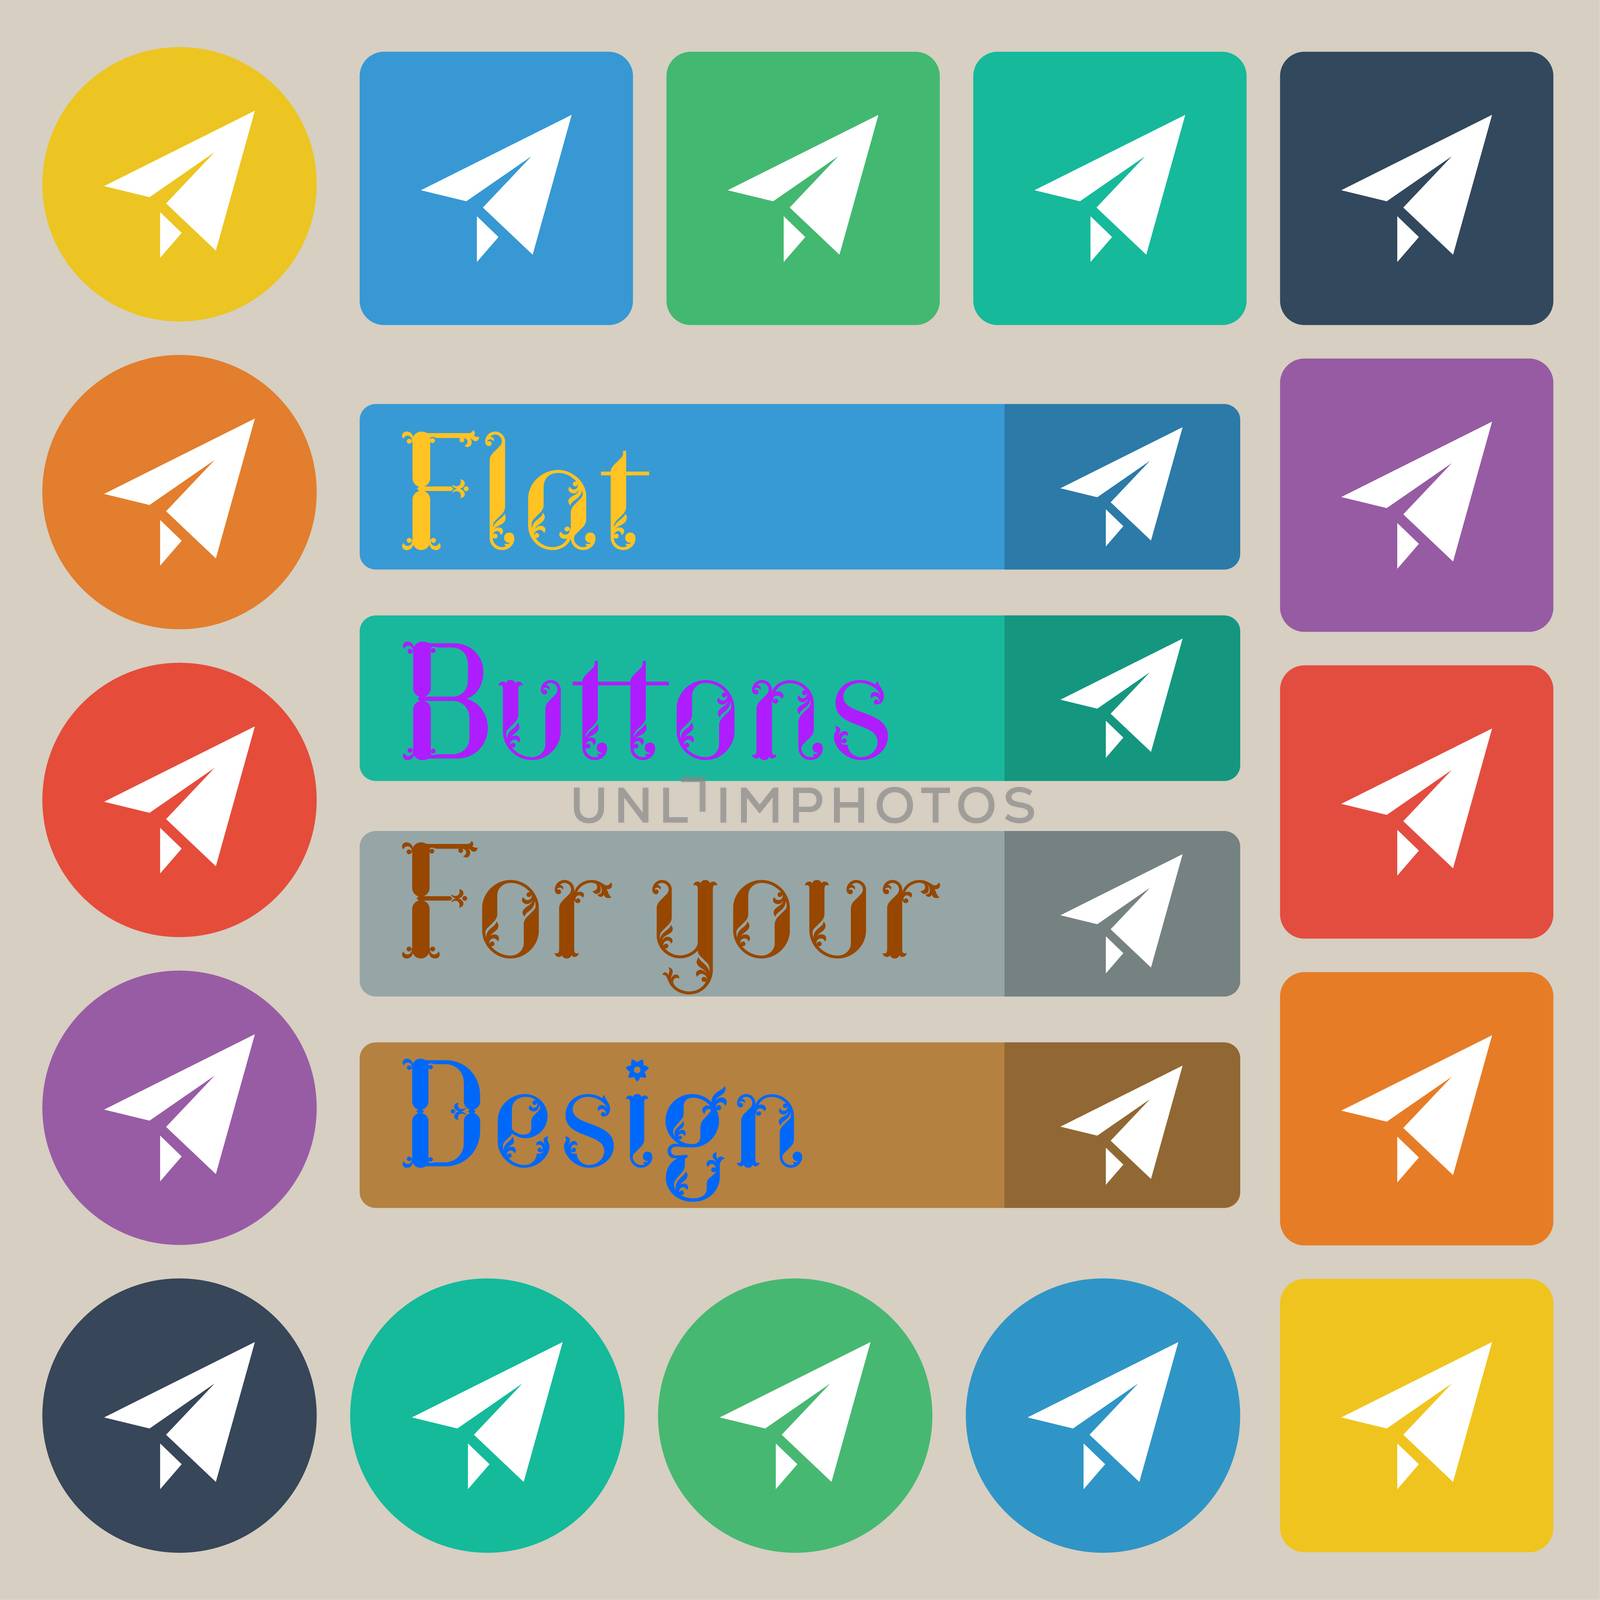 Paper airplane icon sign. Set of twenty colored flat, round, square and rectangular buttons. illustration